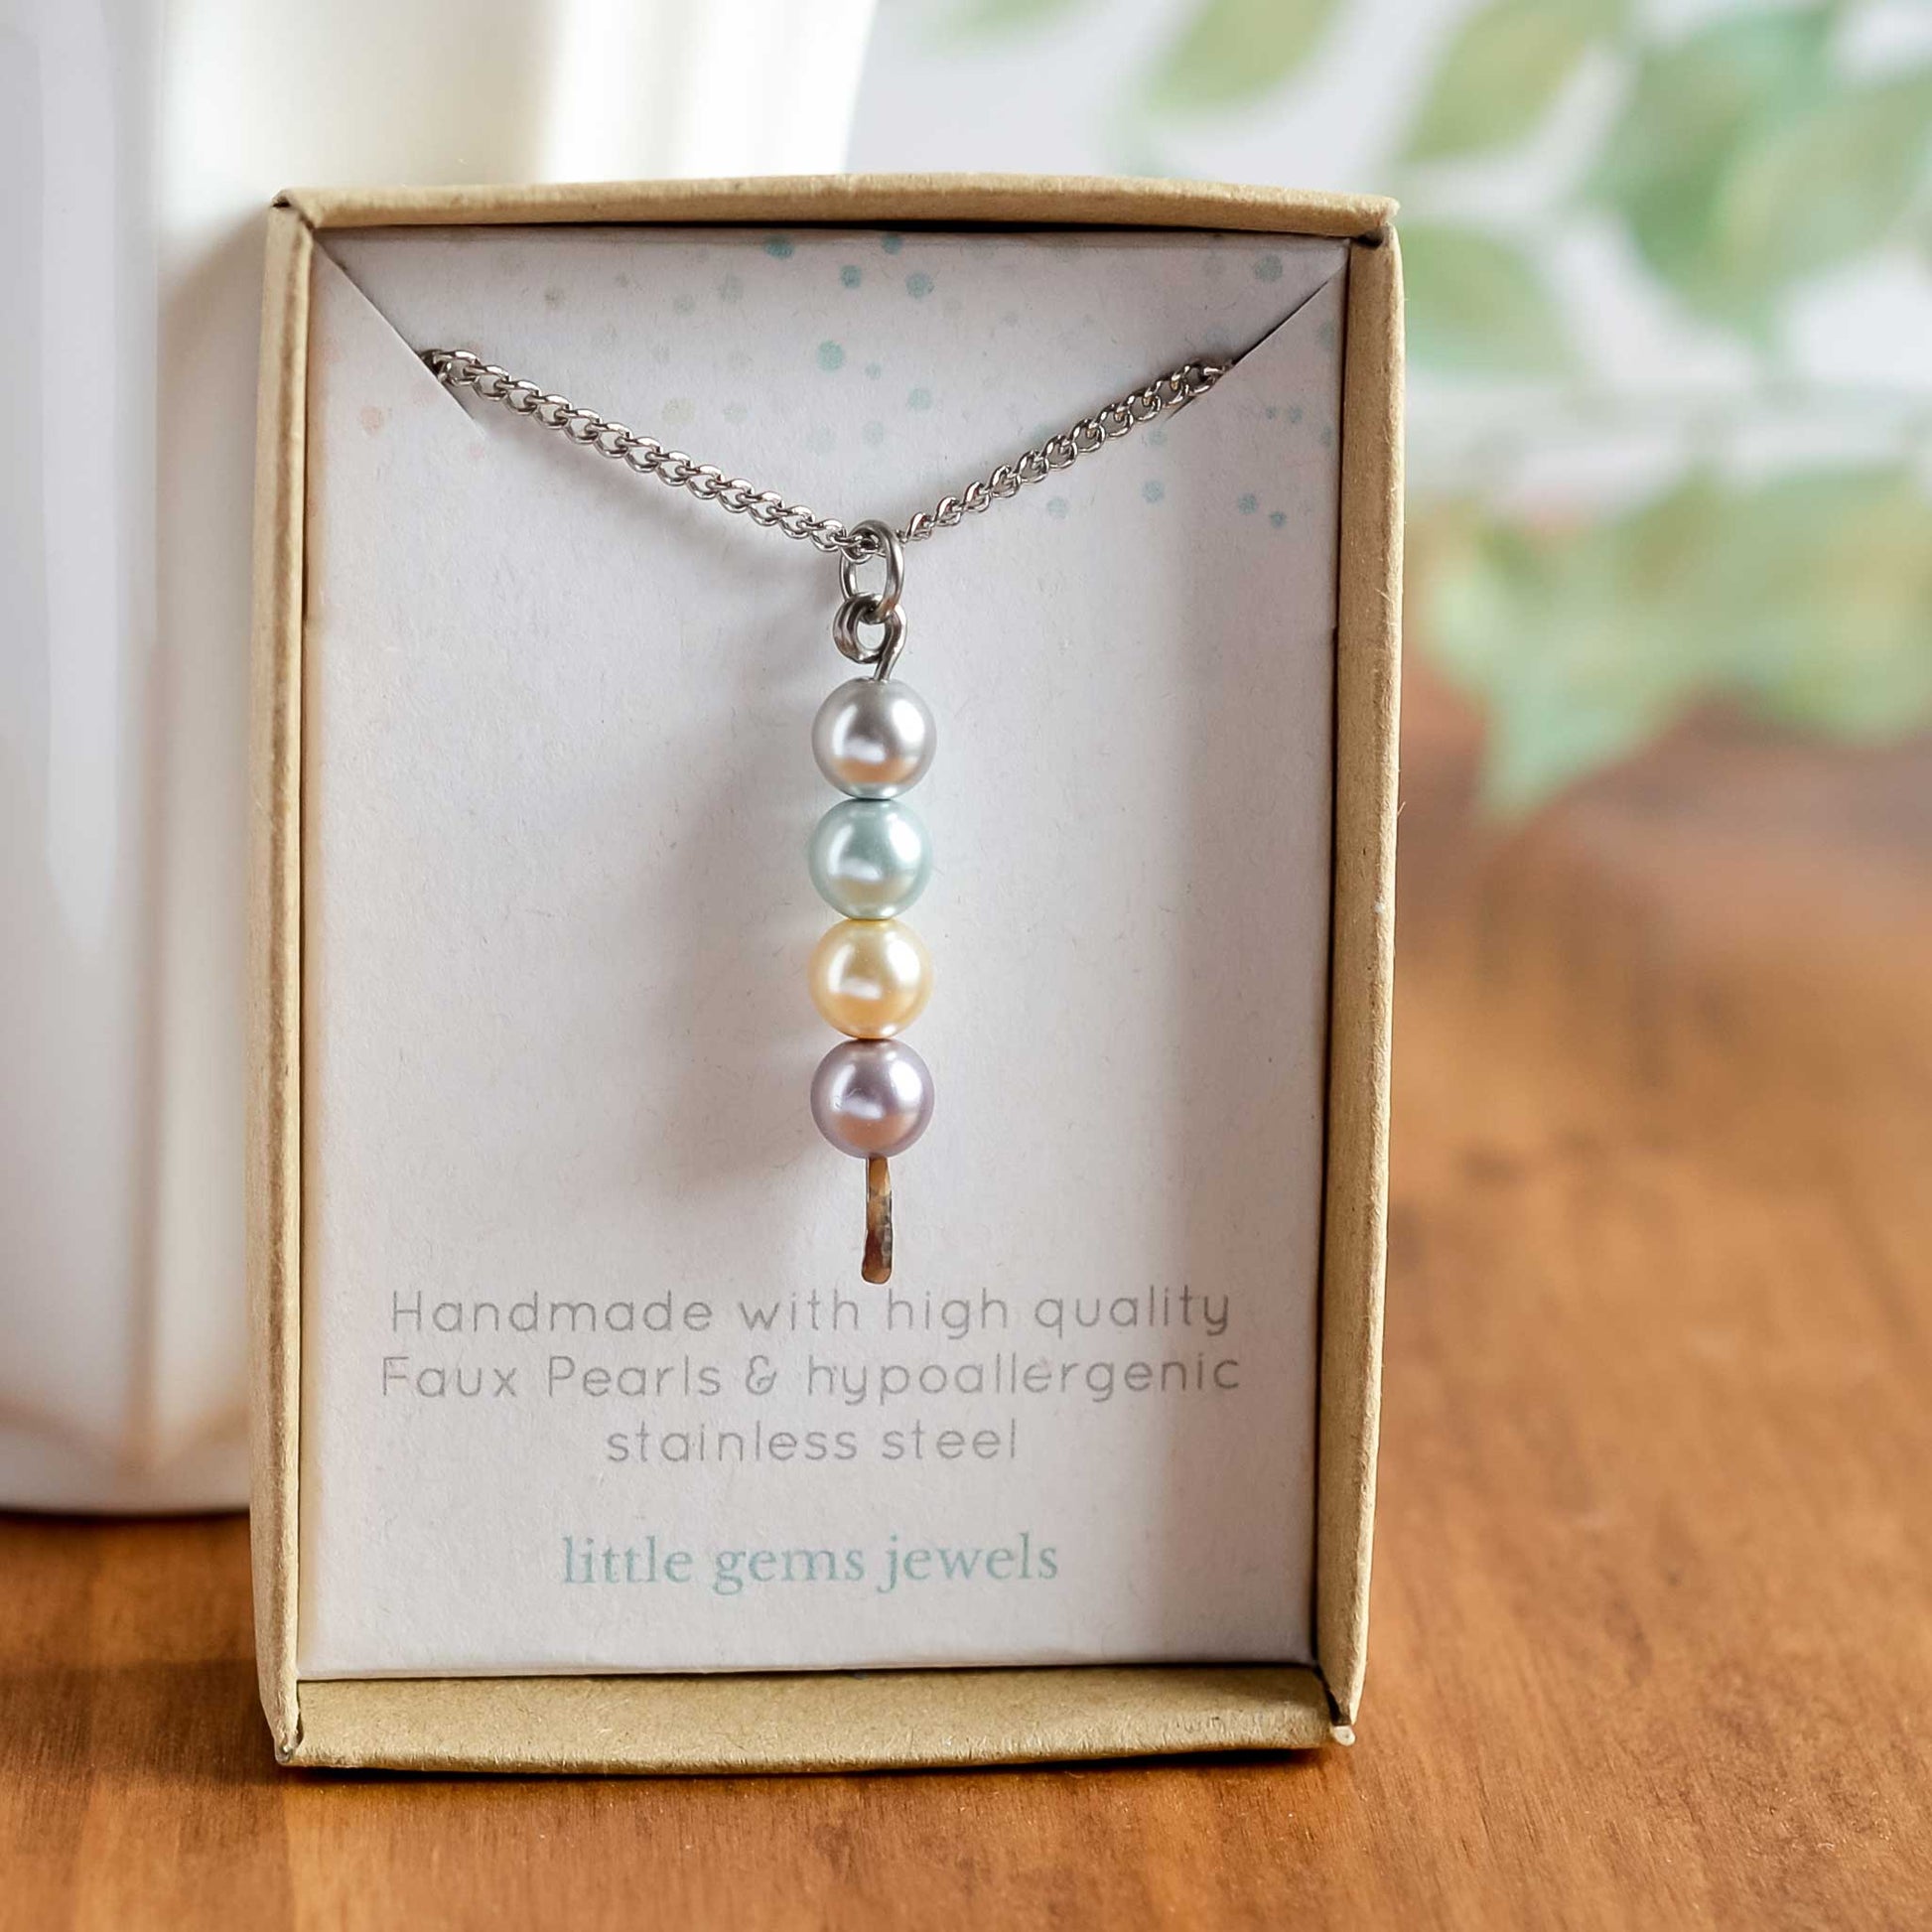 Faux pearl stack pendant in eco friendly gift box